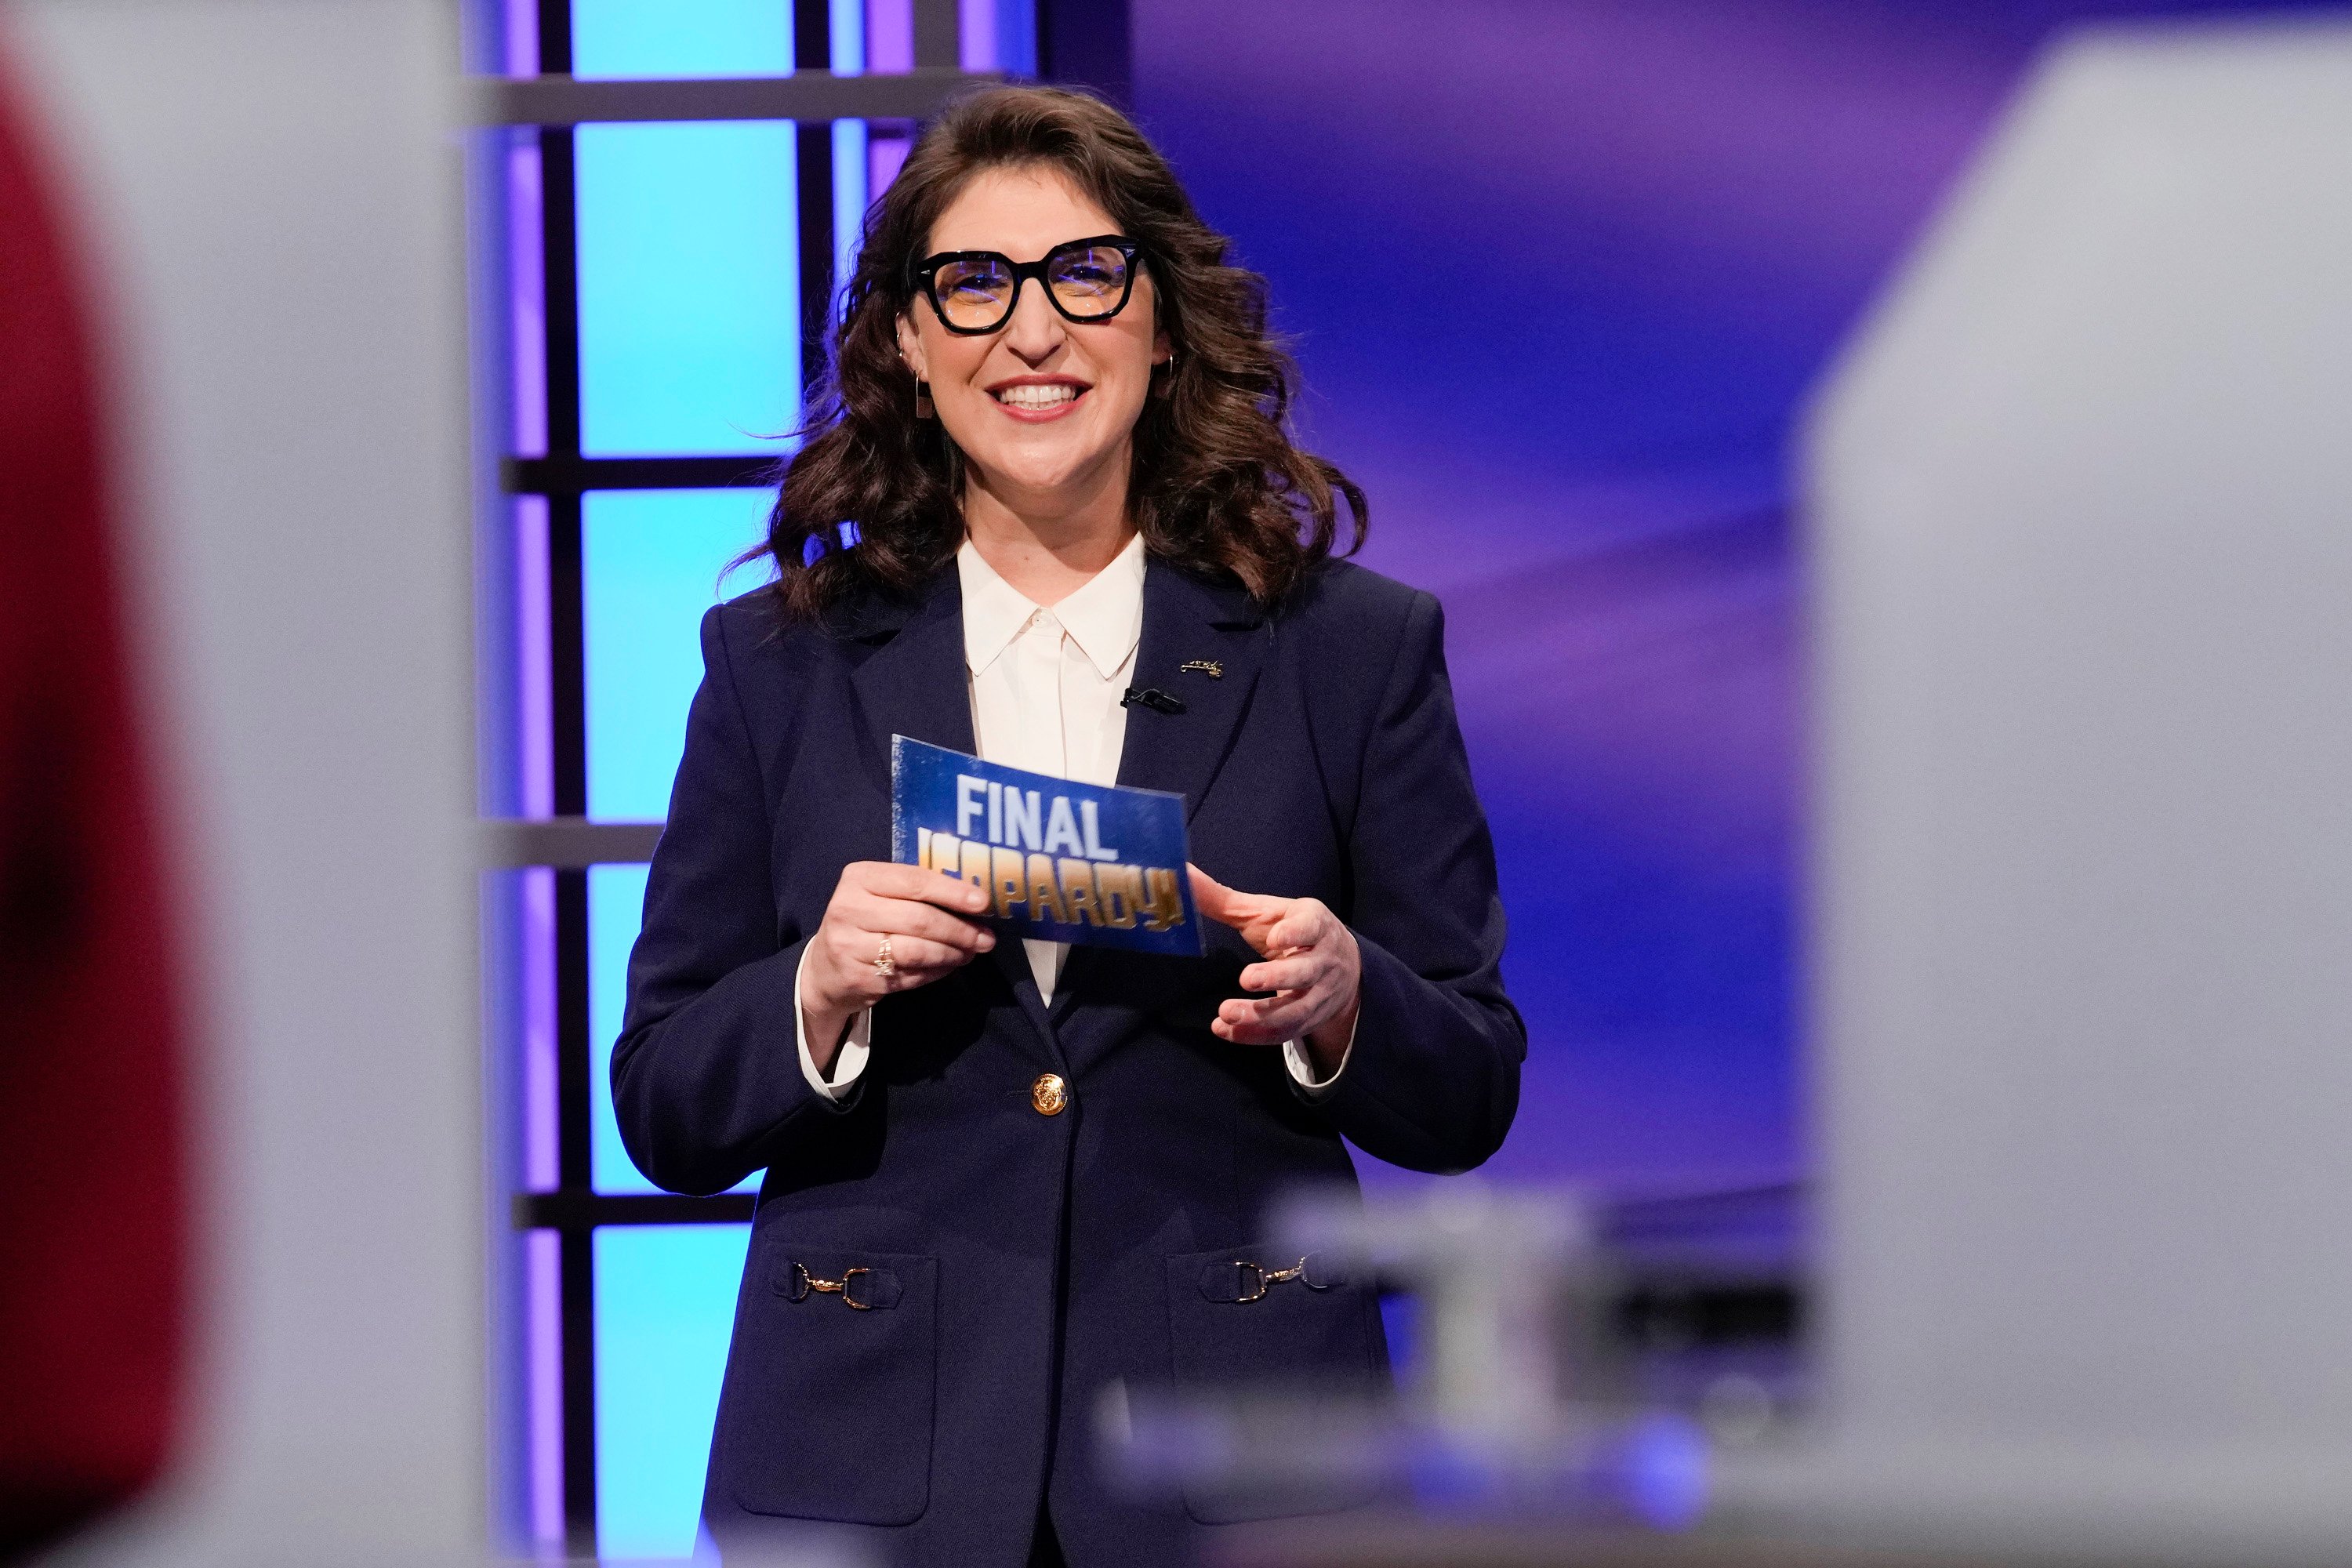 'Jeopardy!' host Mayim Bialik wearing glasses and a navy blue suit while filming an episode of the game show.